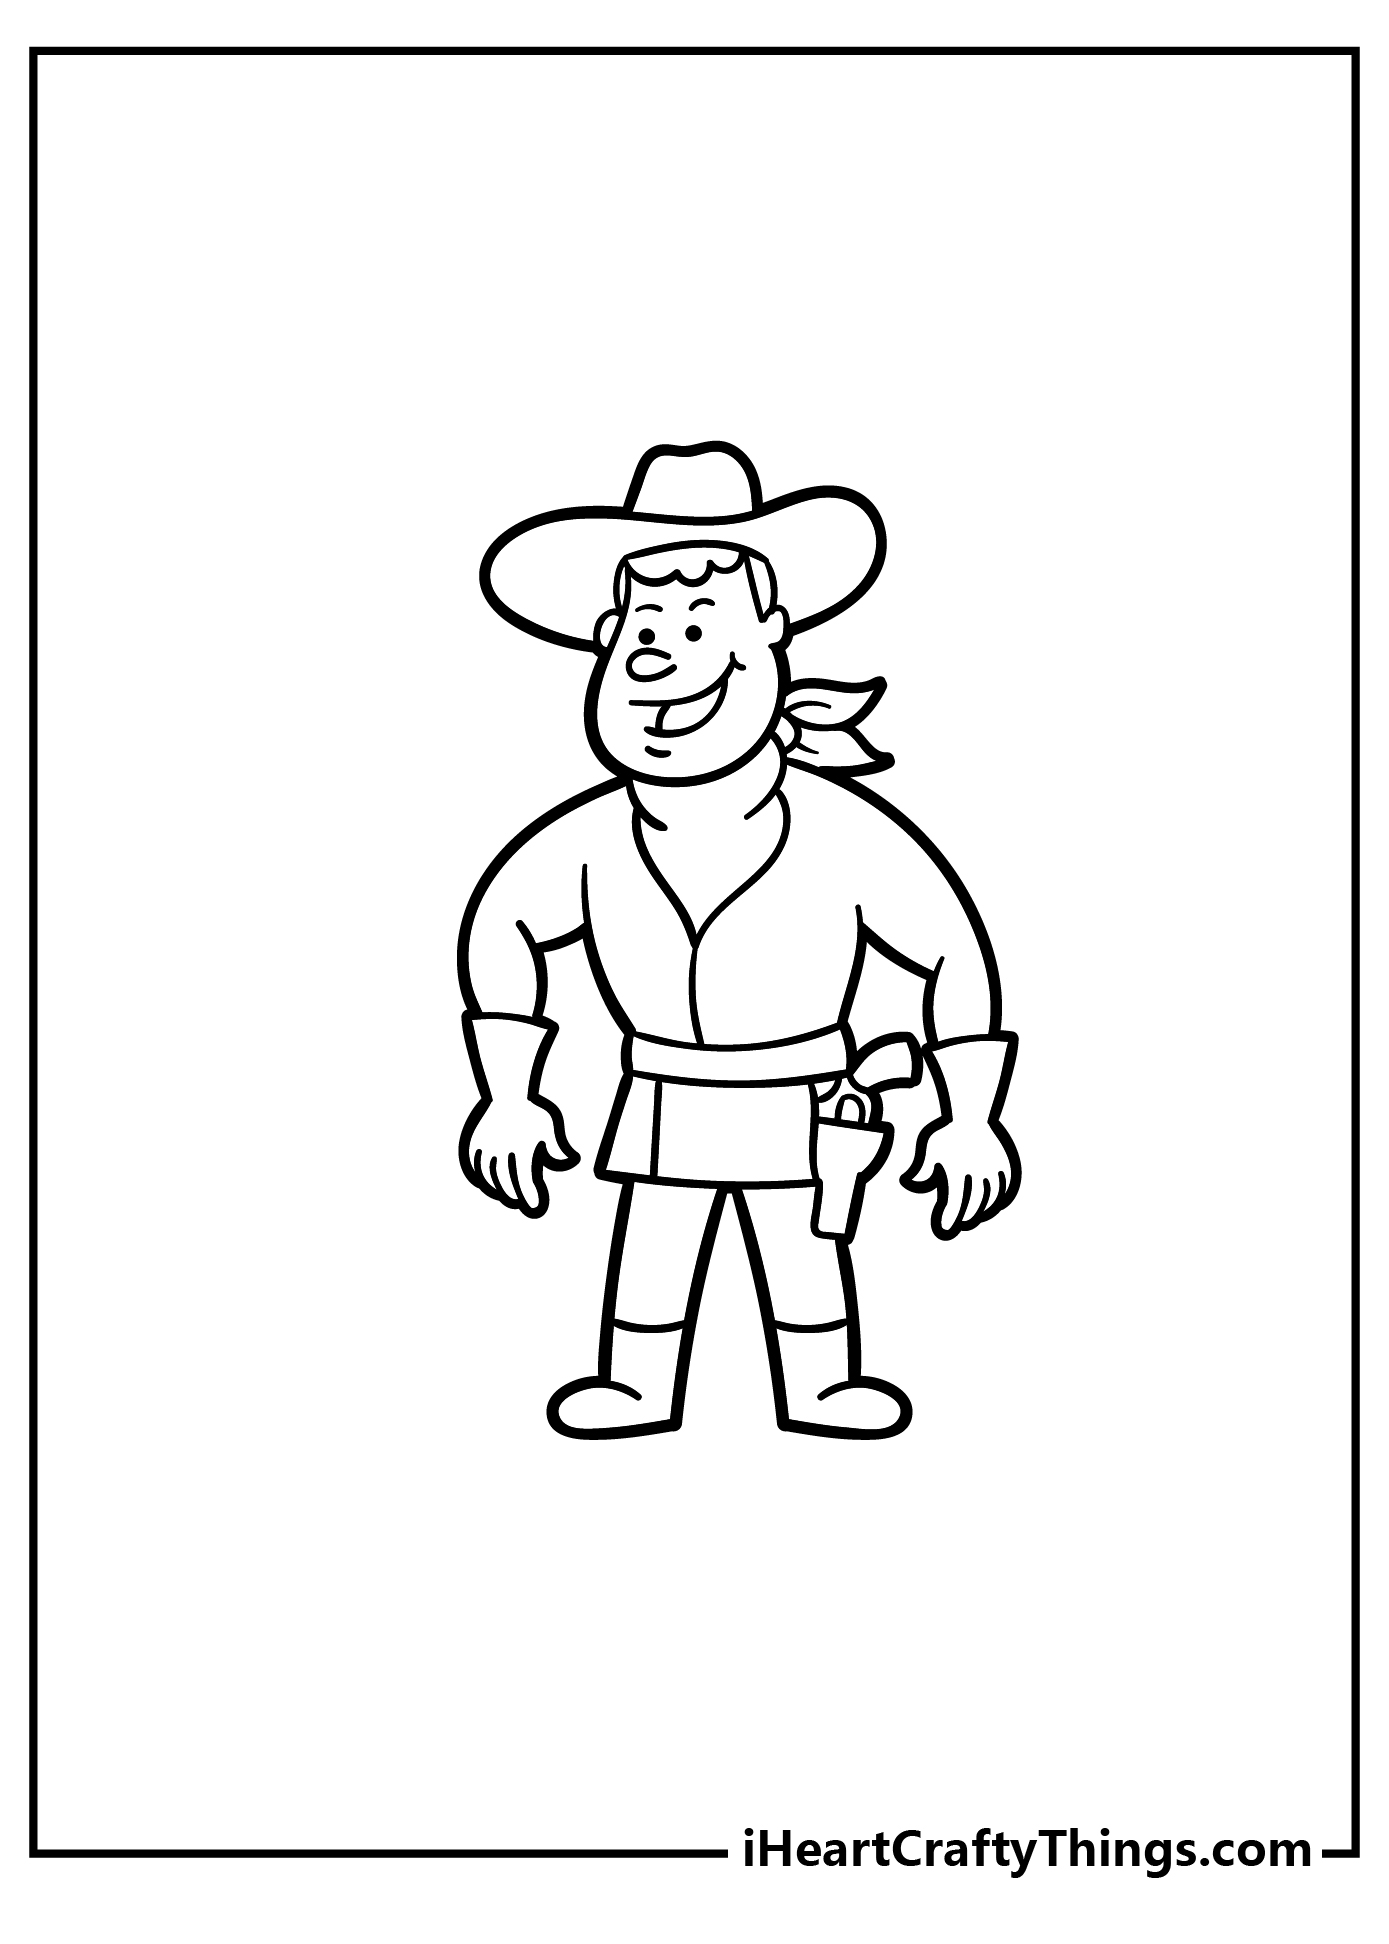 Cowboy Coloring Sheet for children free download